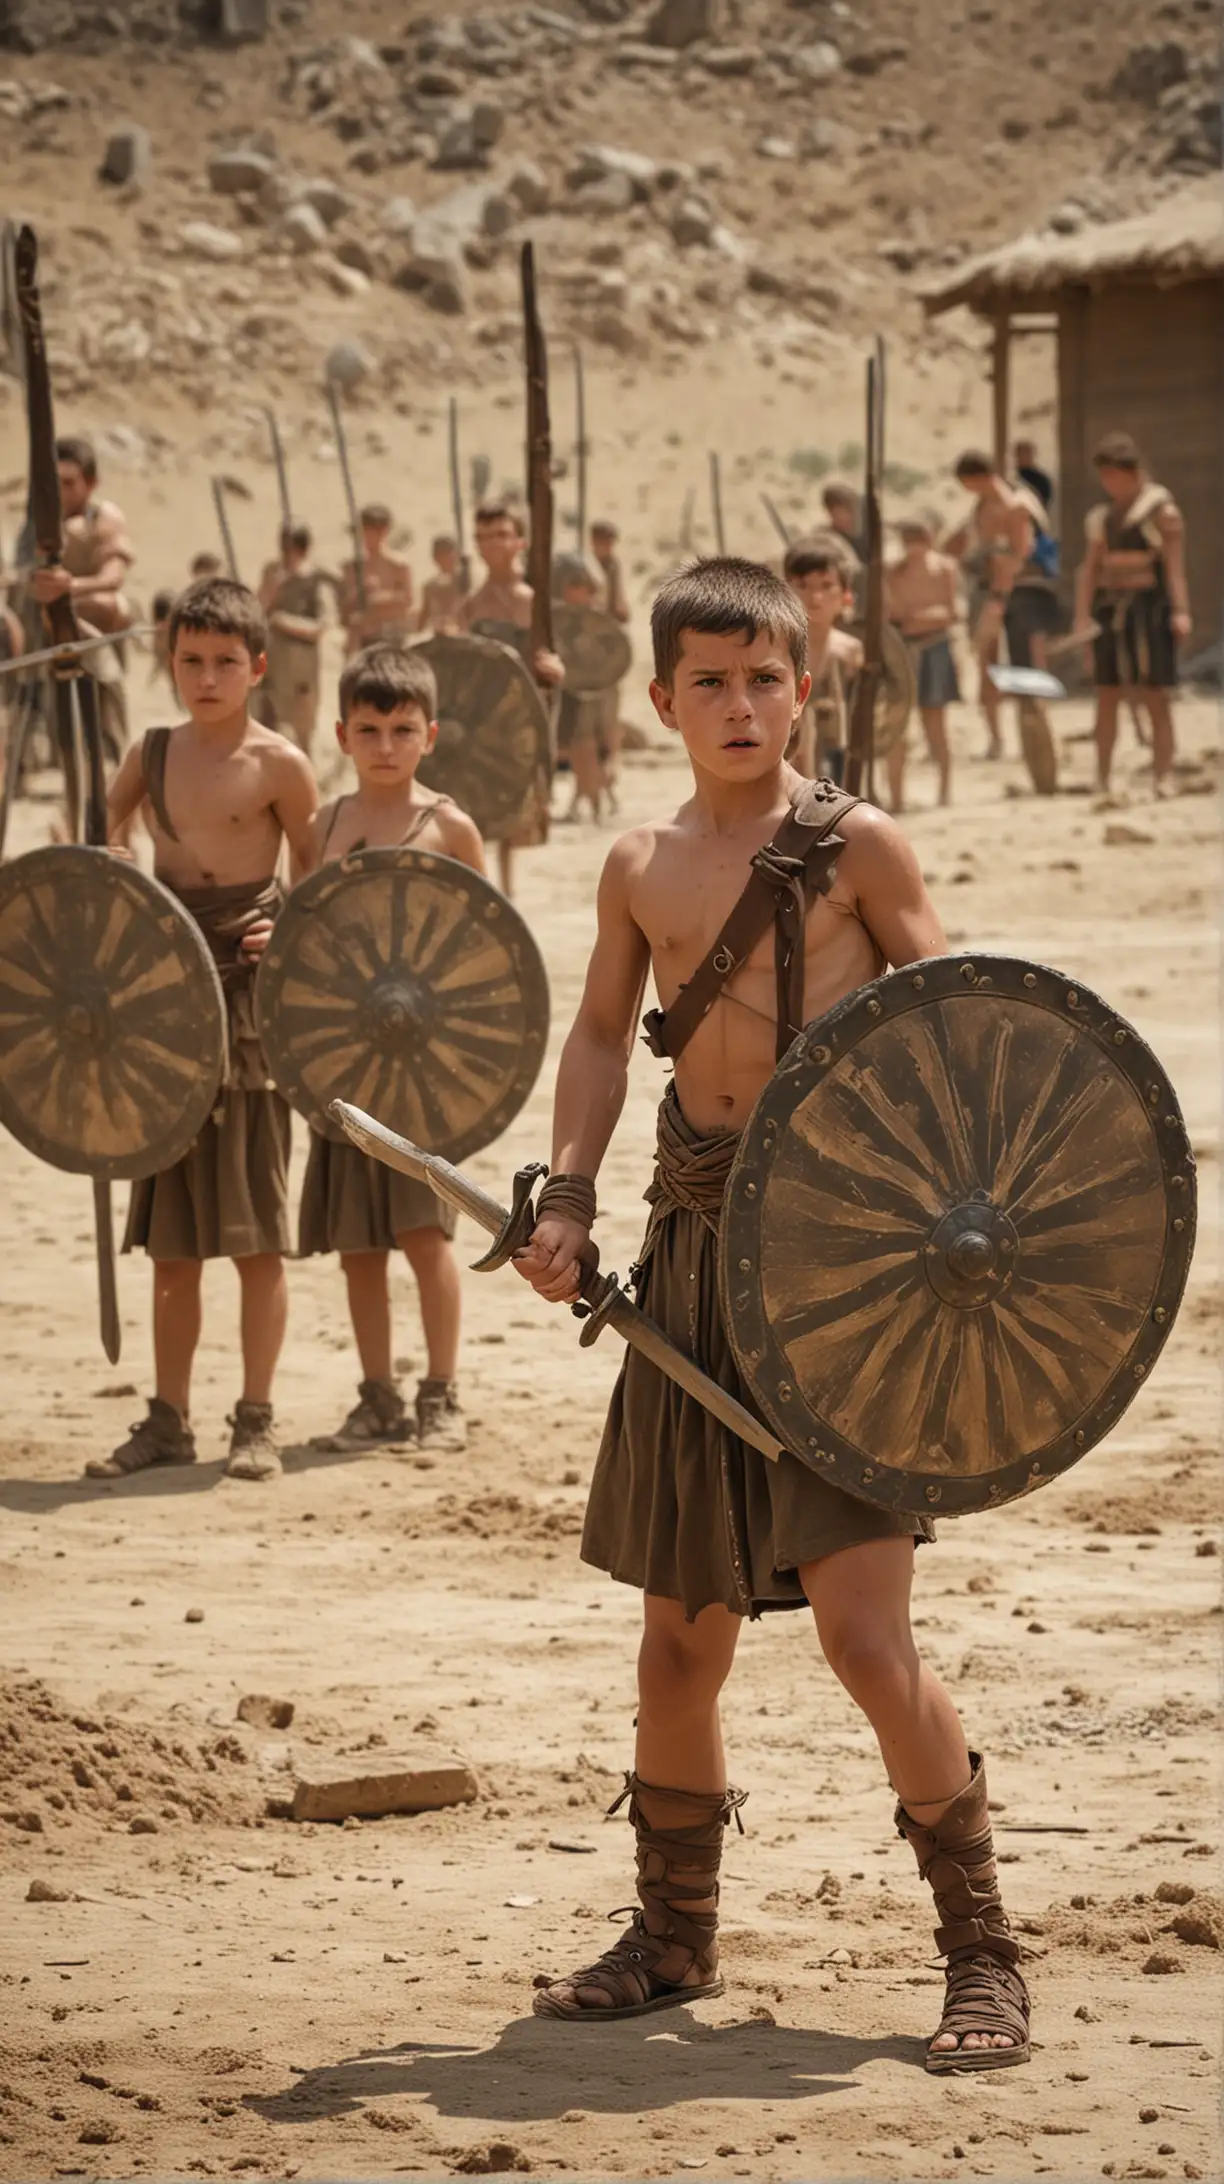 Spartan Warrior Training Young Boys in Agoge Practice with Swords and Shields